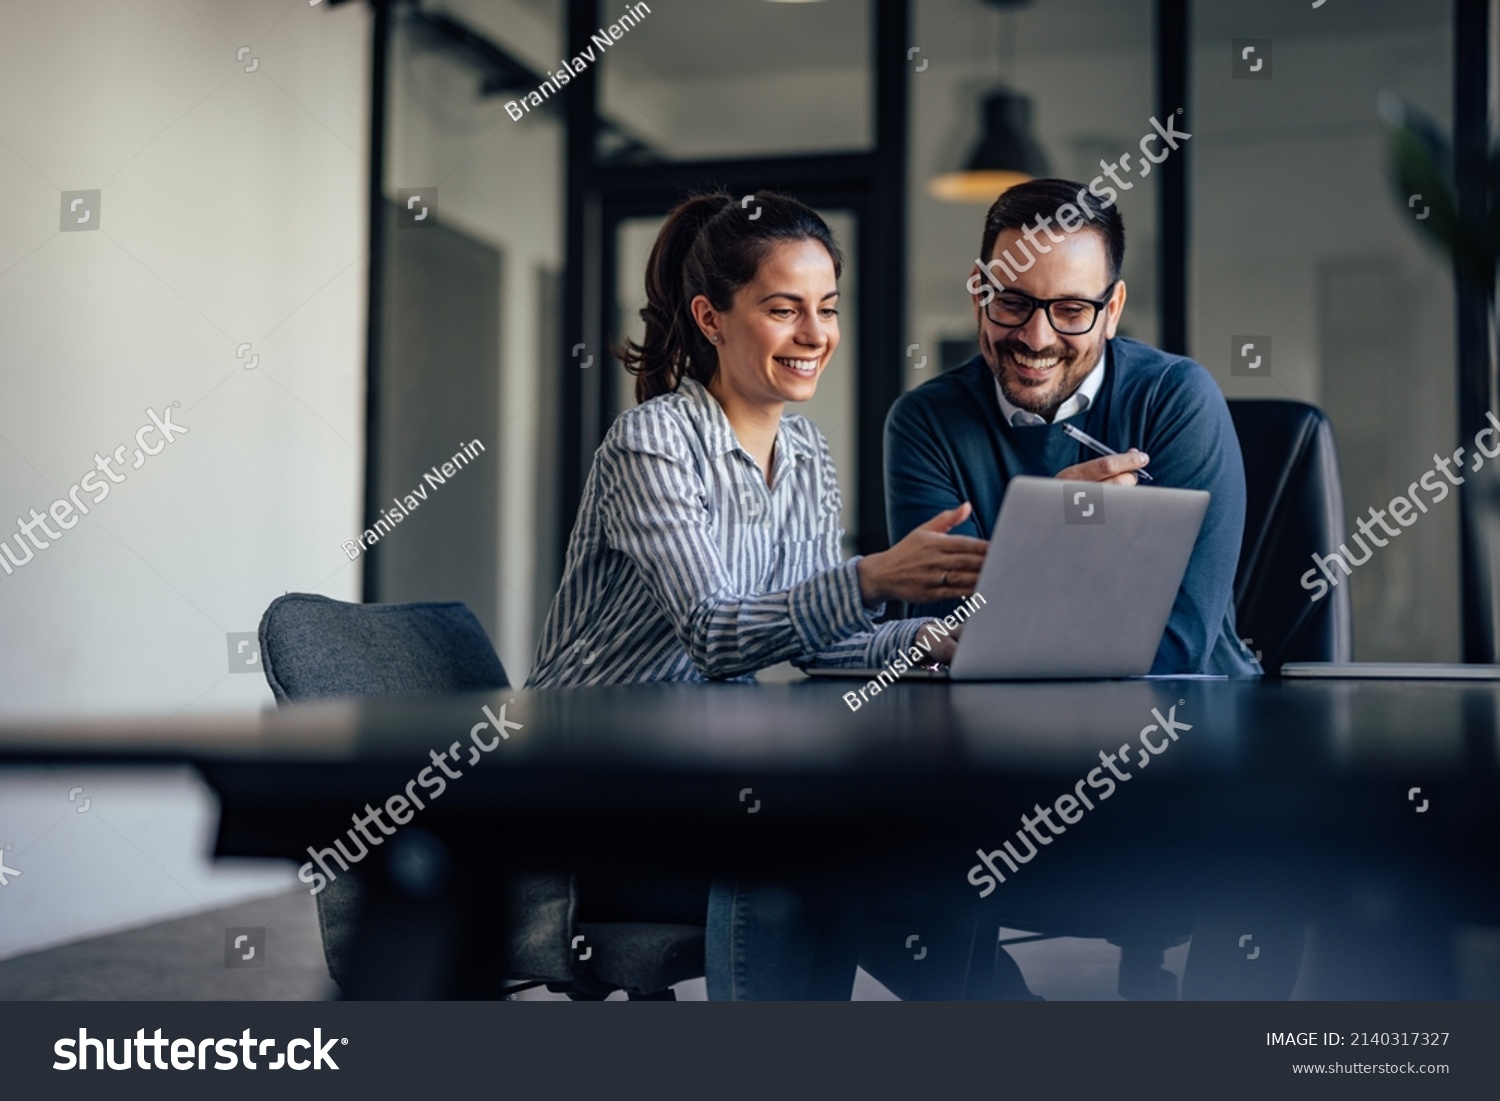 Smiling business people, looking at something over the laptop. #2140317327